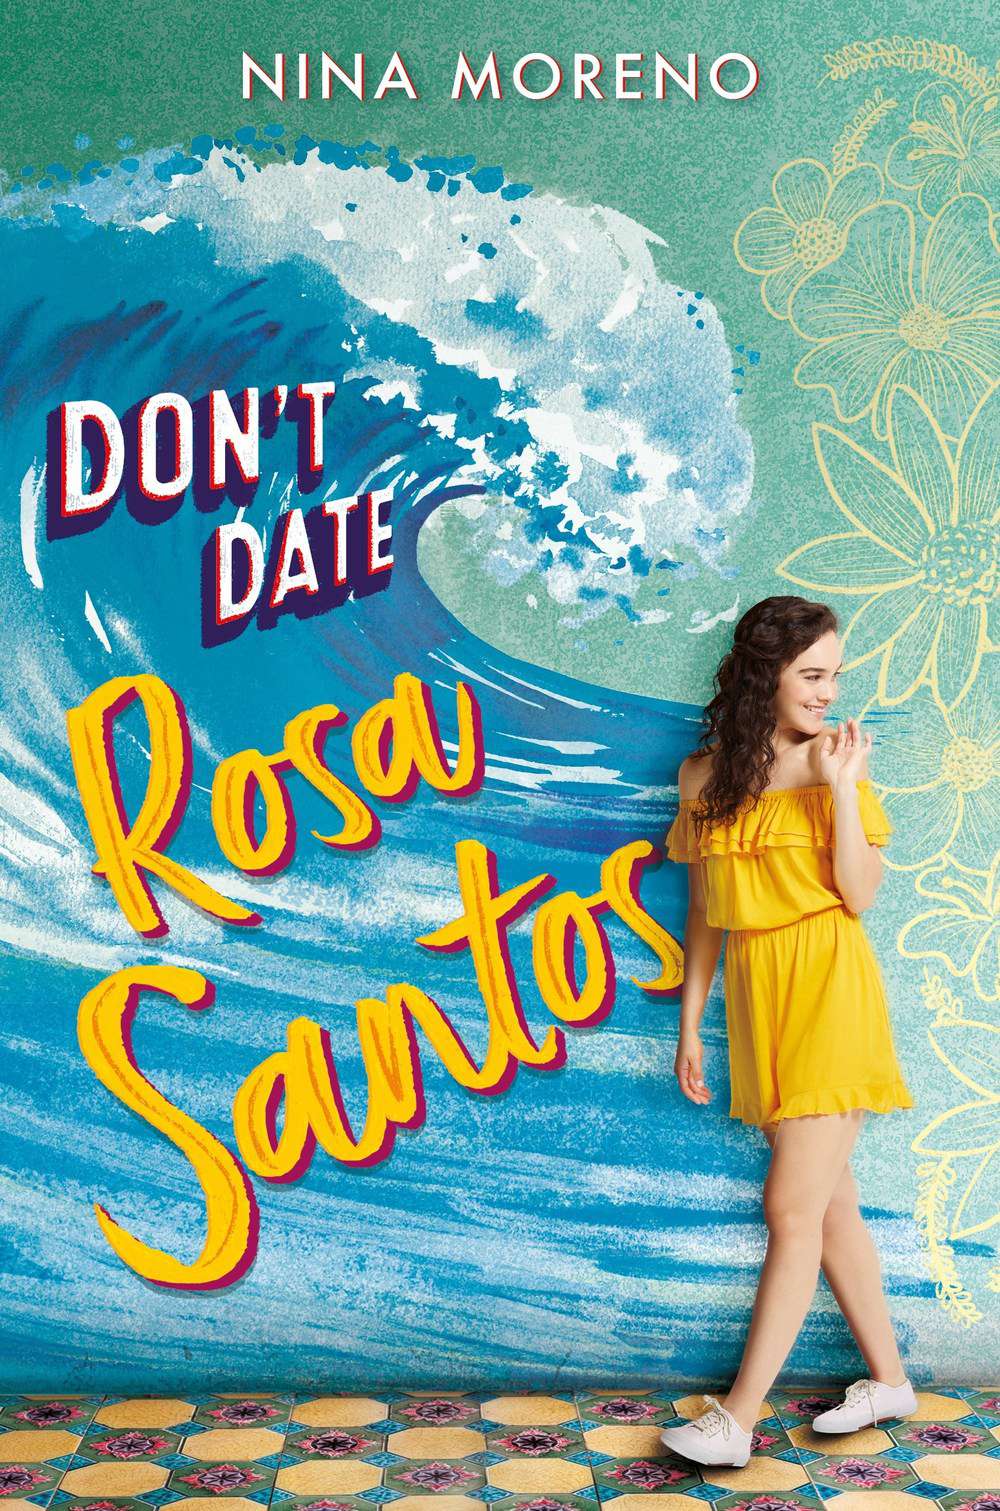 Books featuring badass women of color: 'Don't Date Rosa Santos' by Nina Moreno